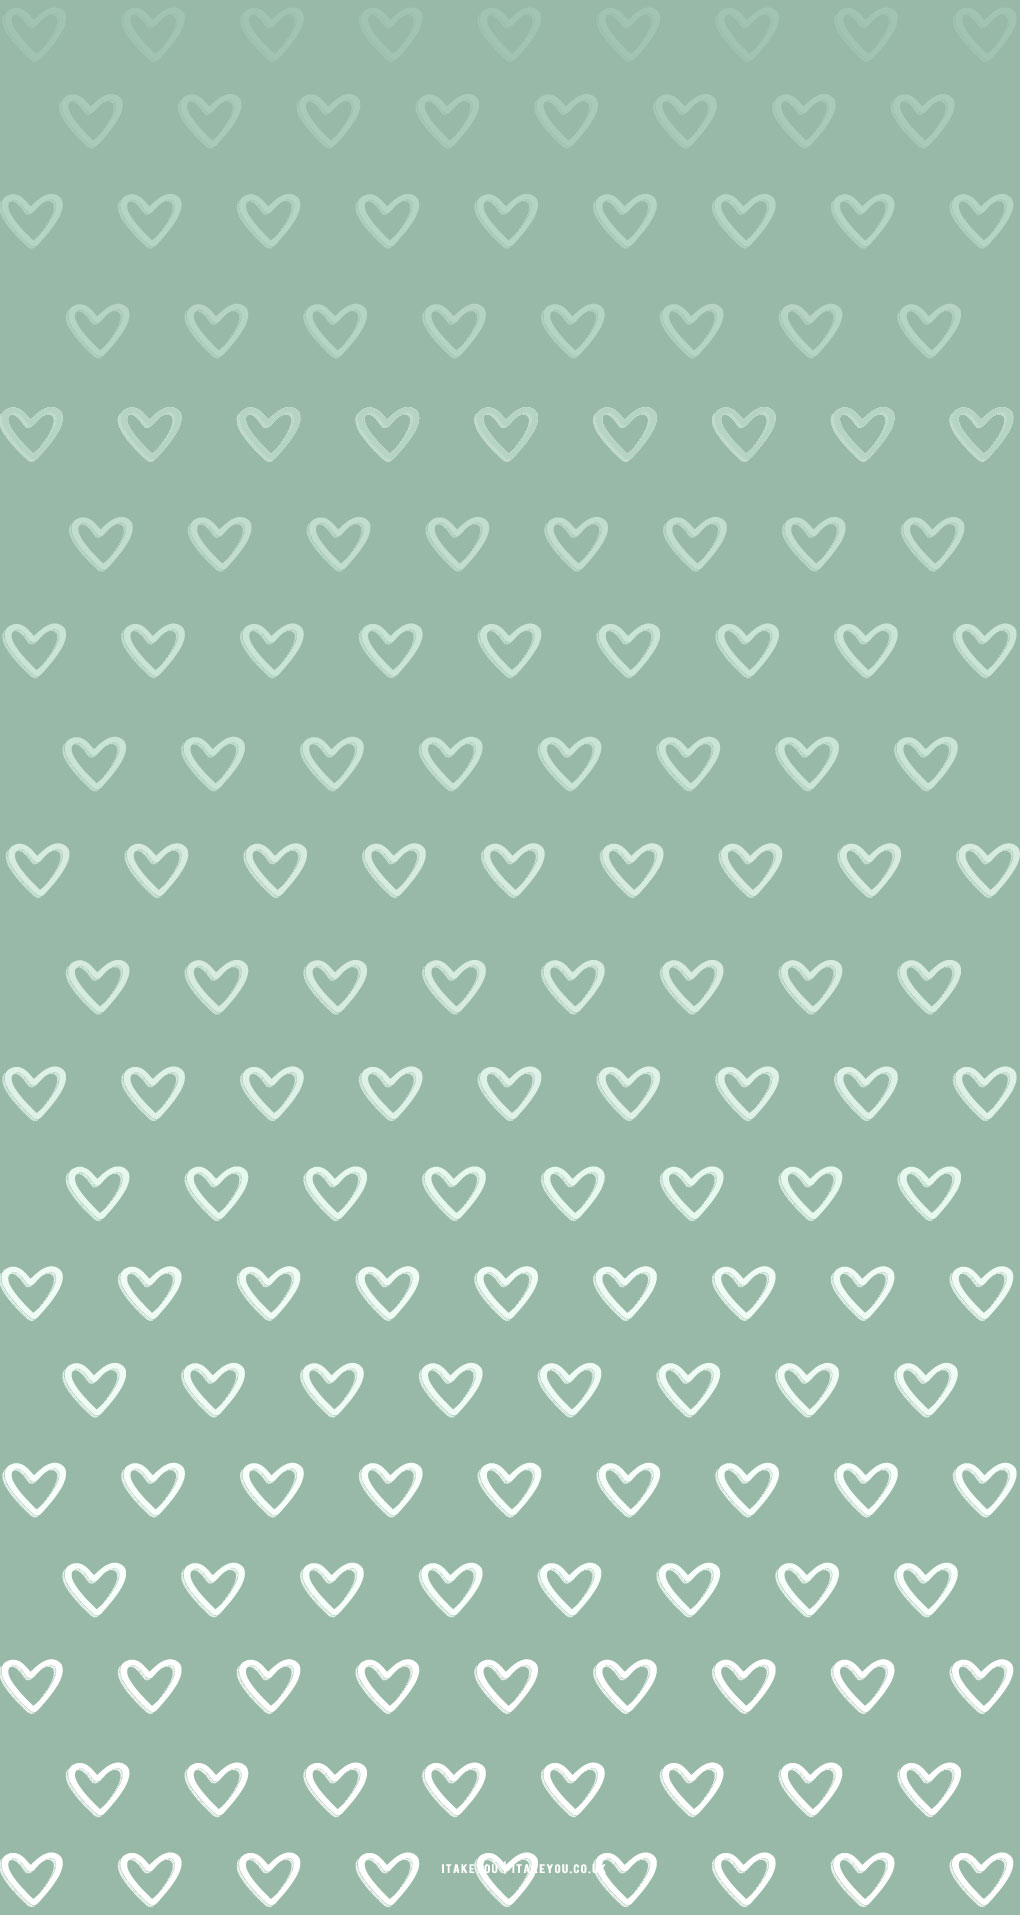 Sage Green Minimalist Wallpaper for Phone, Ombre Hearts I Take You. Wedding Readings. Wedding Ideas